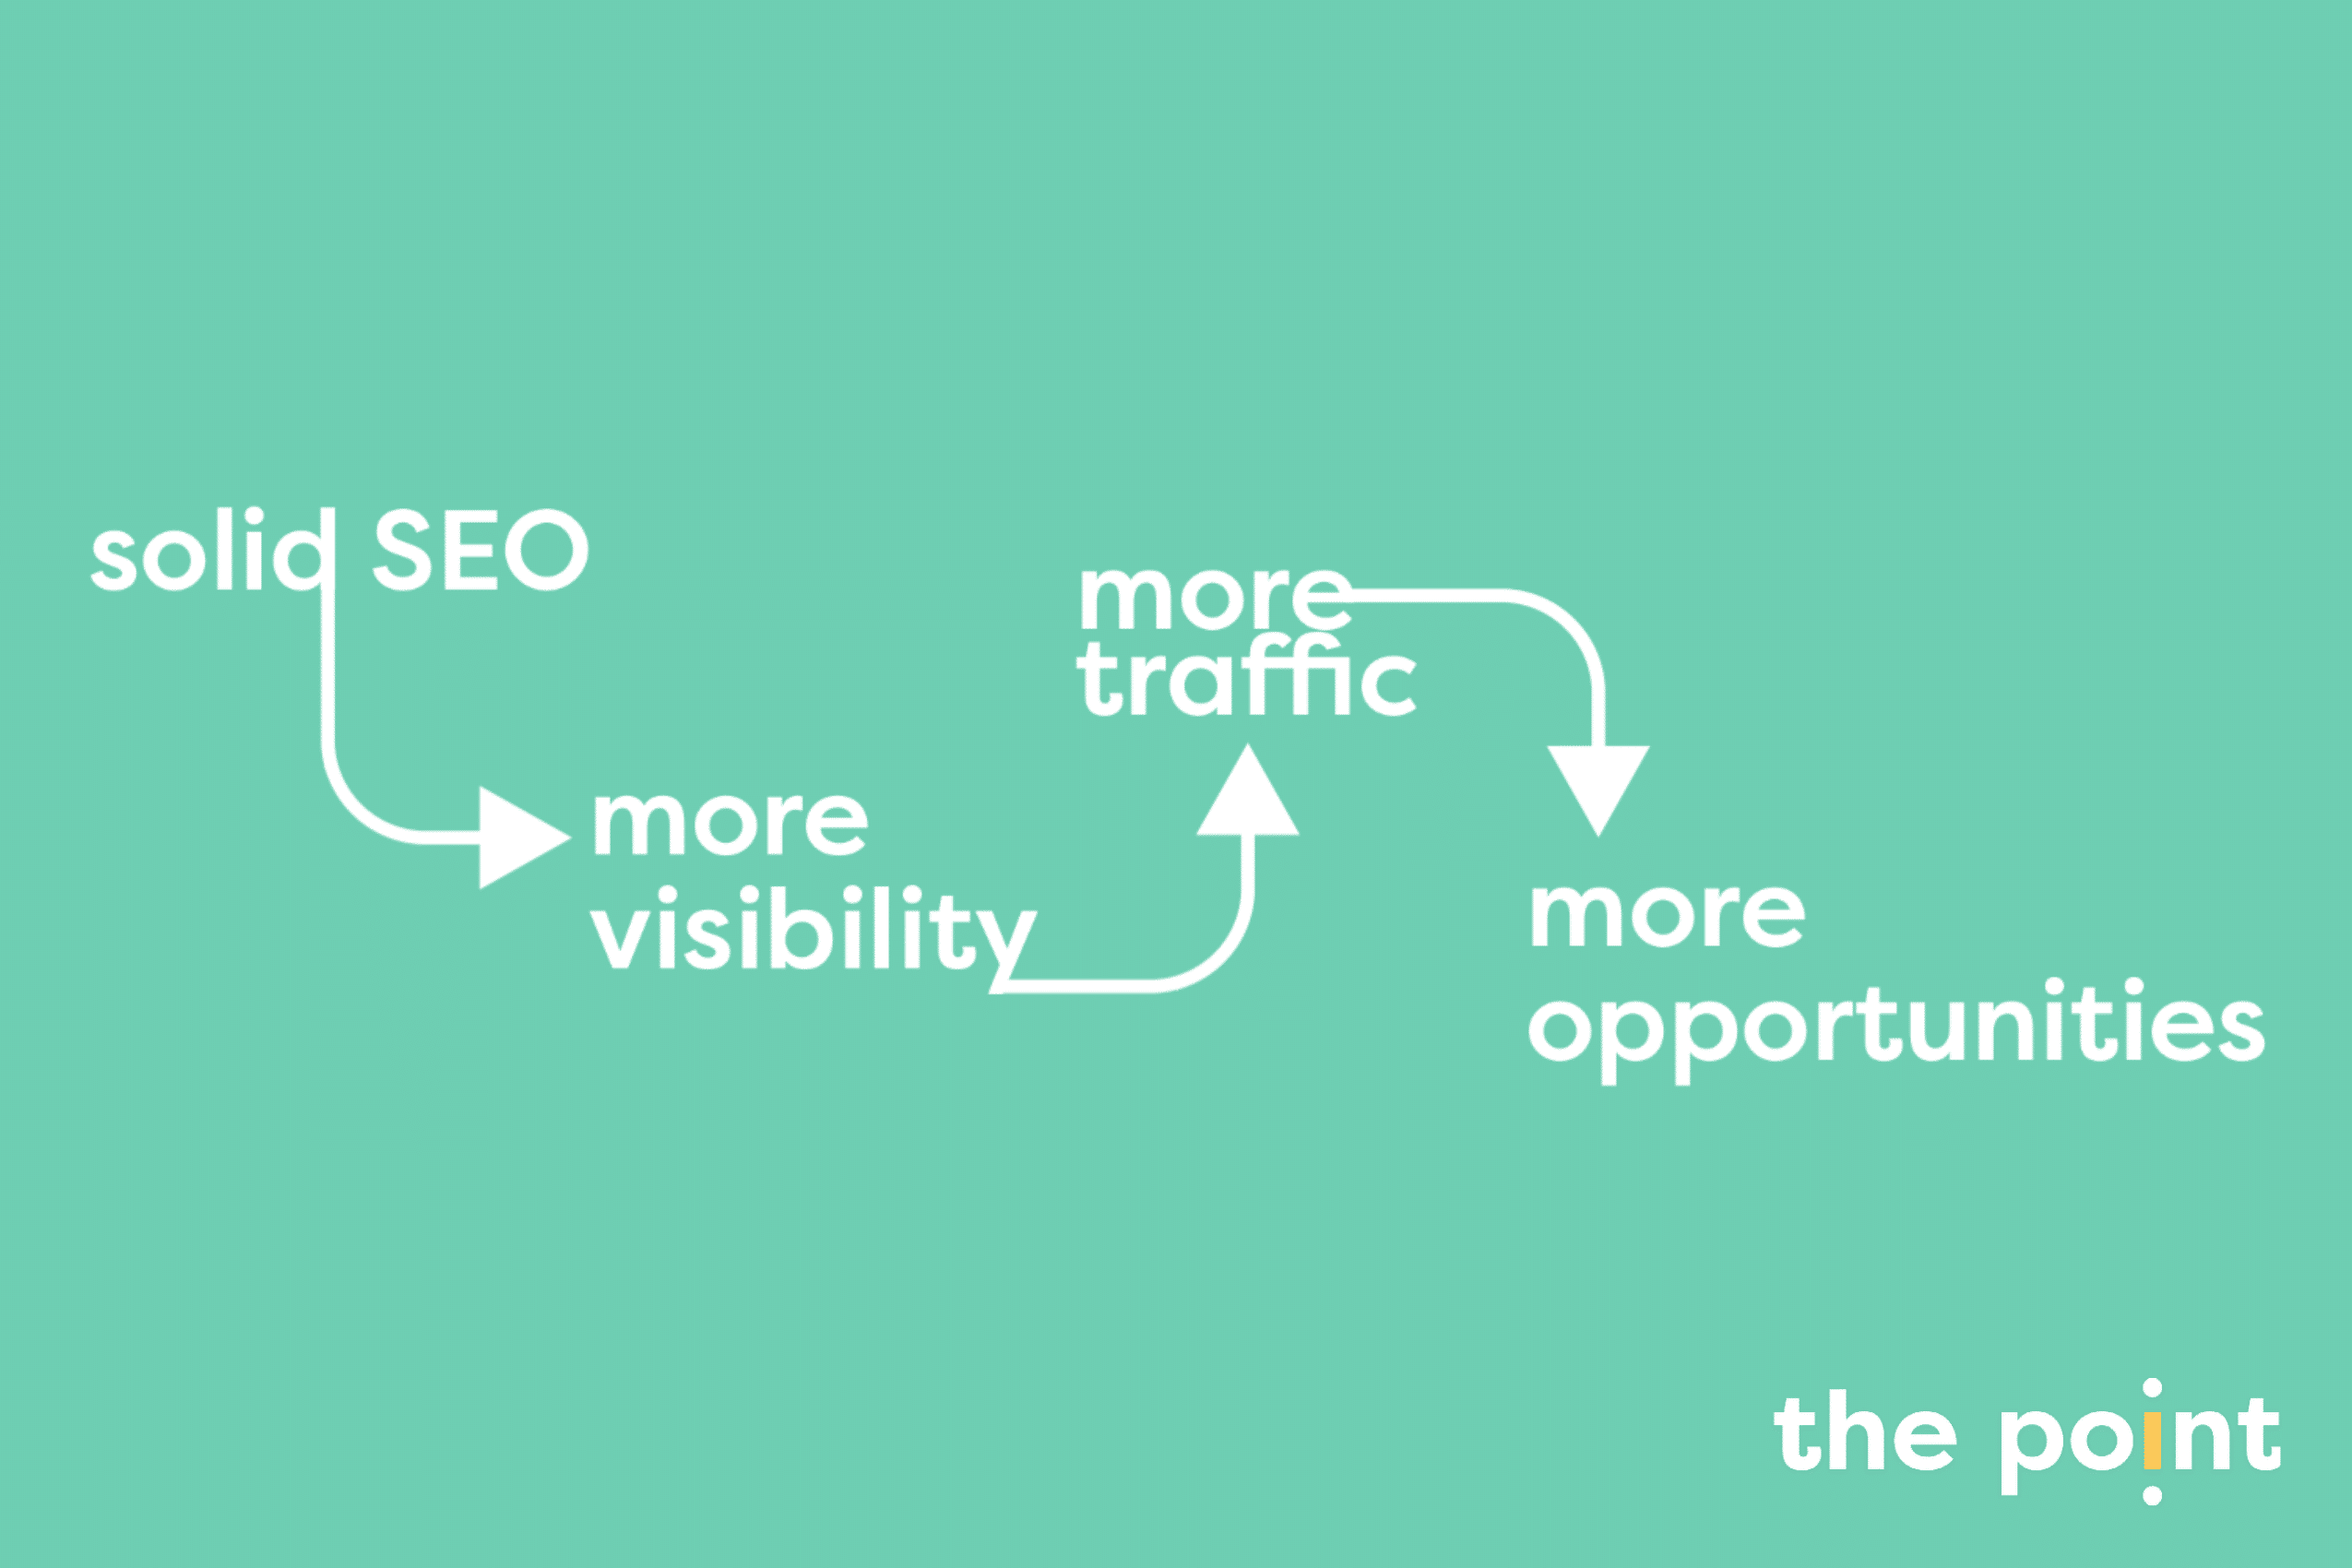 Why SEO is a key part of your strategy